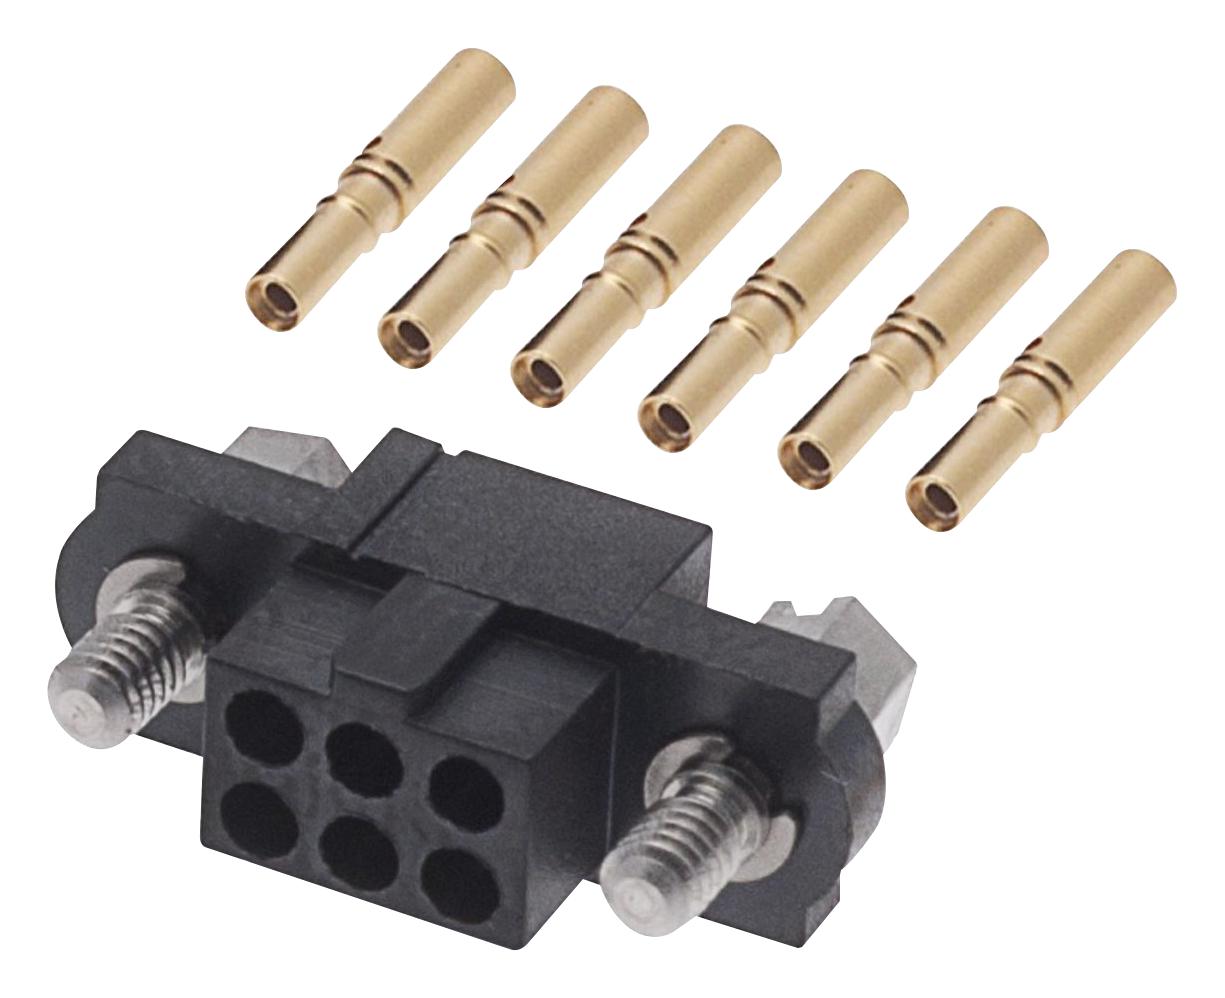 M80-4610605 CONNECTOR, RECEPTACLE, 6POS, 2ROW, 2MM HARWIN